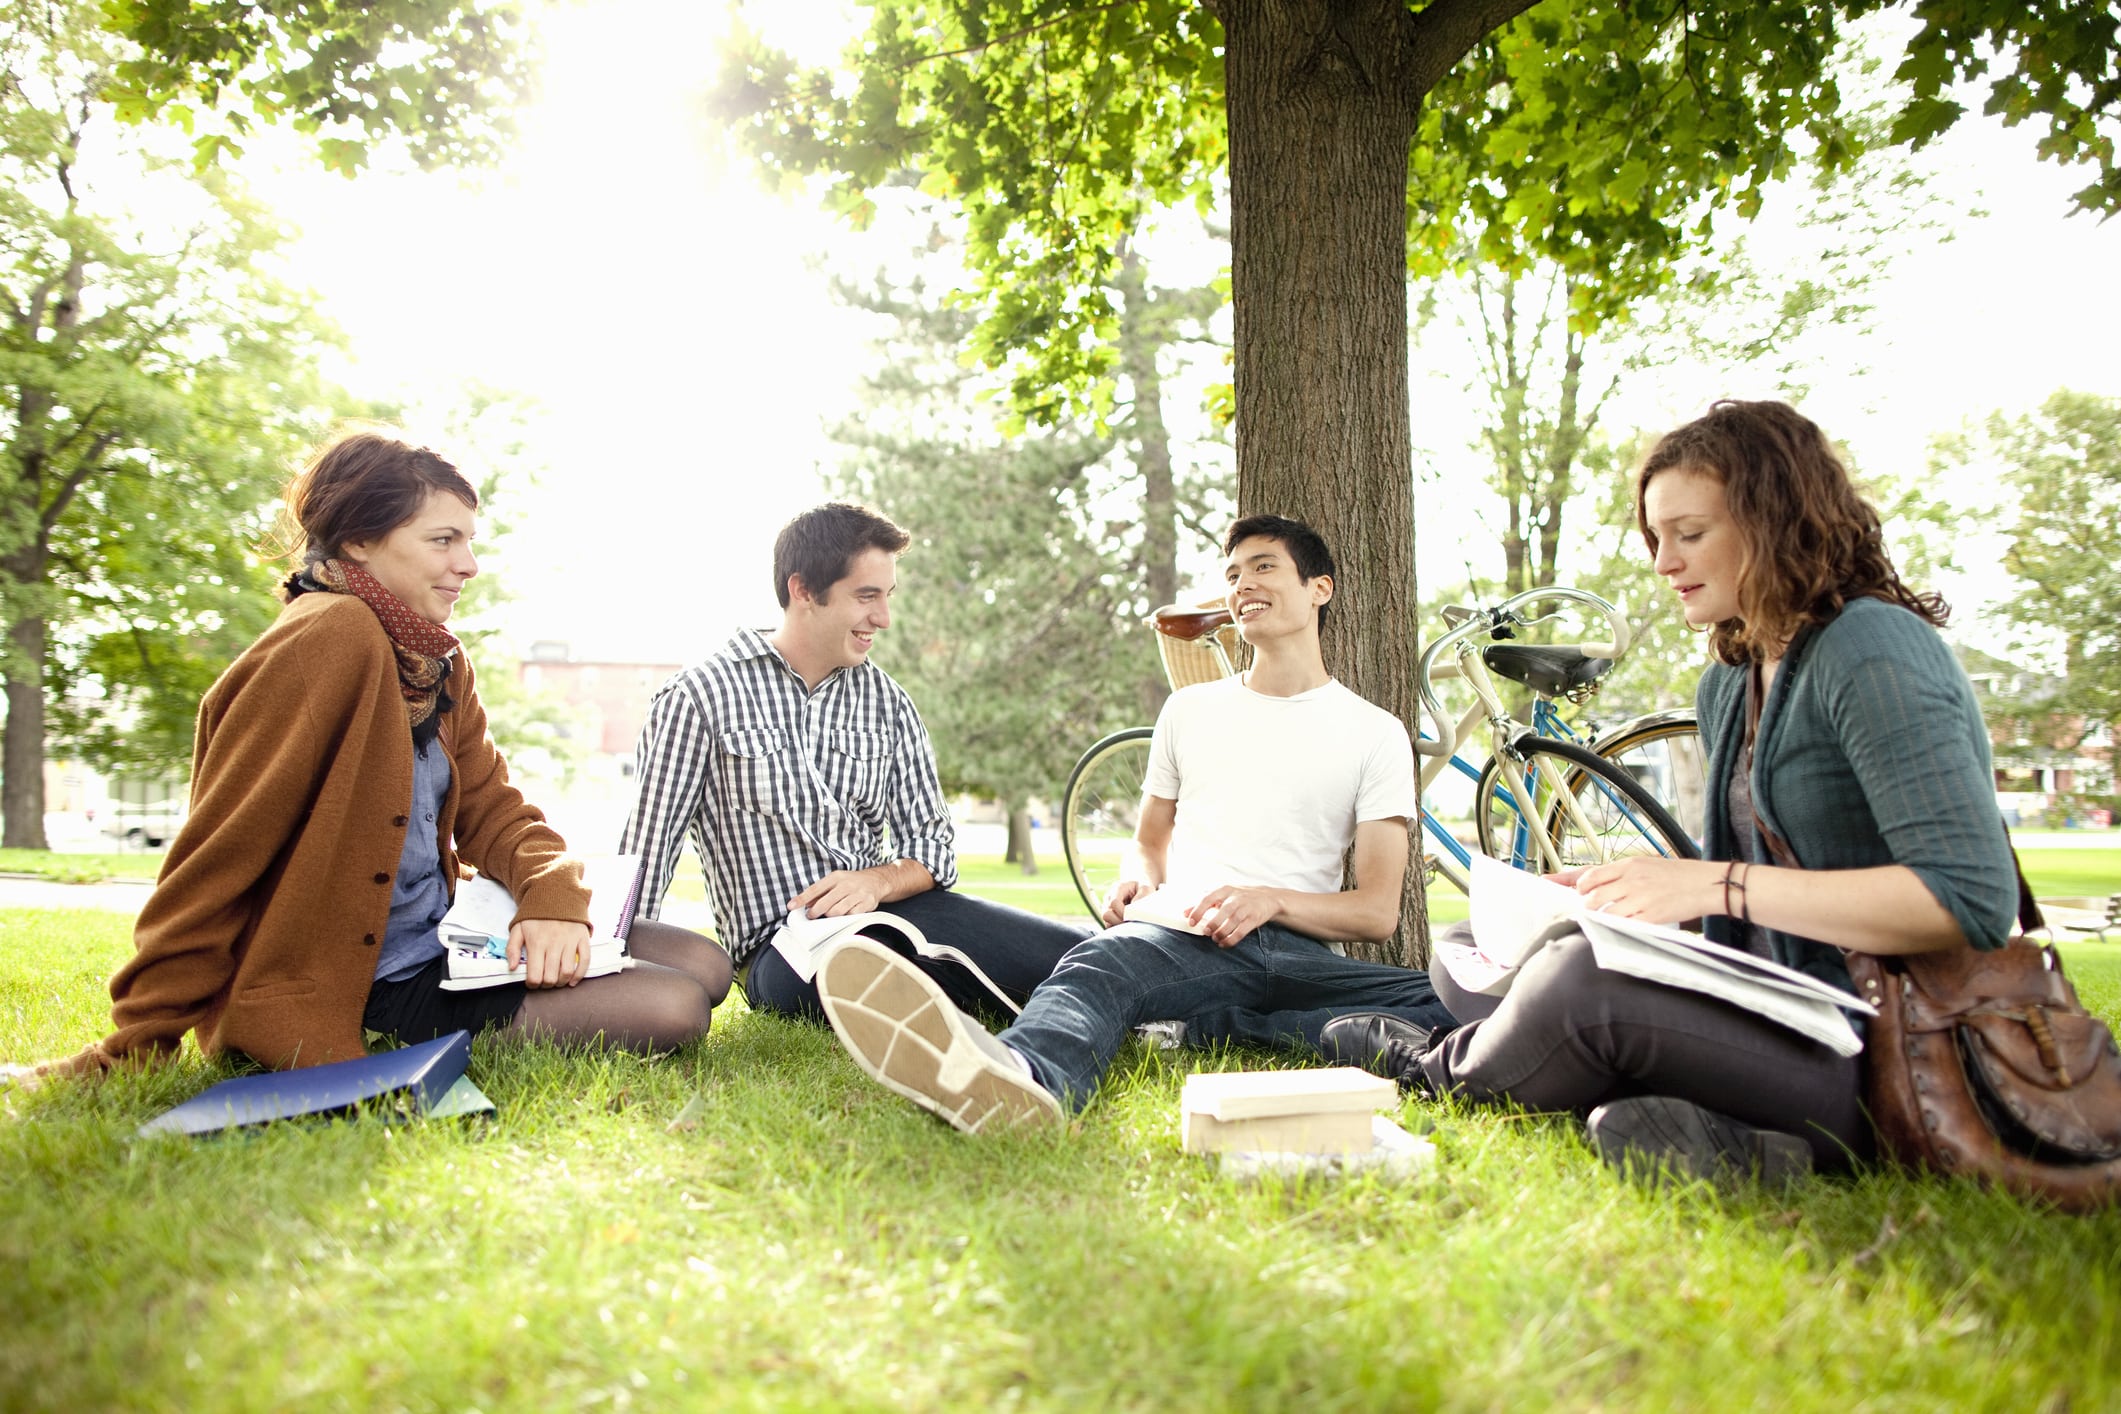 Students hanging out outside under tree.